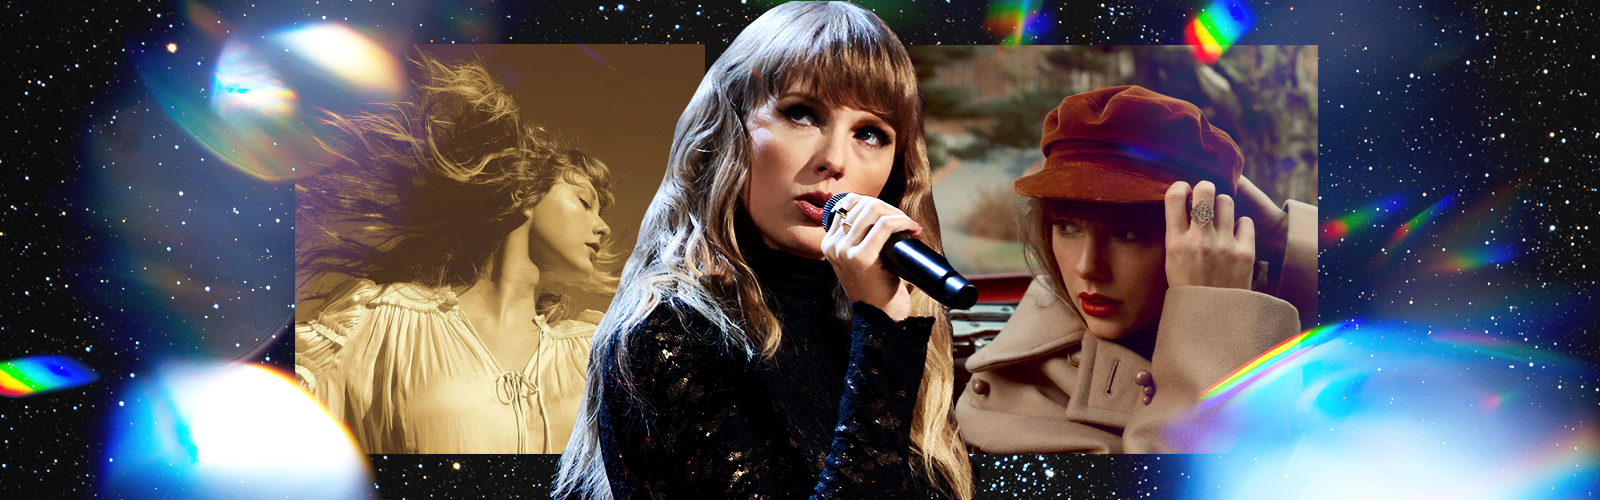 taylor swift's vault songs ranked